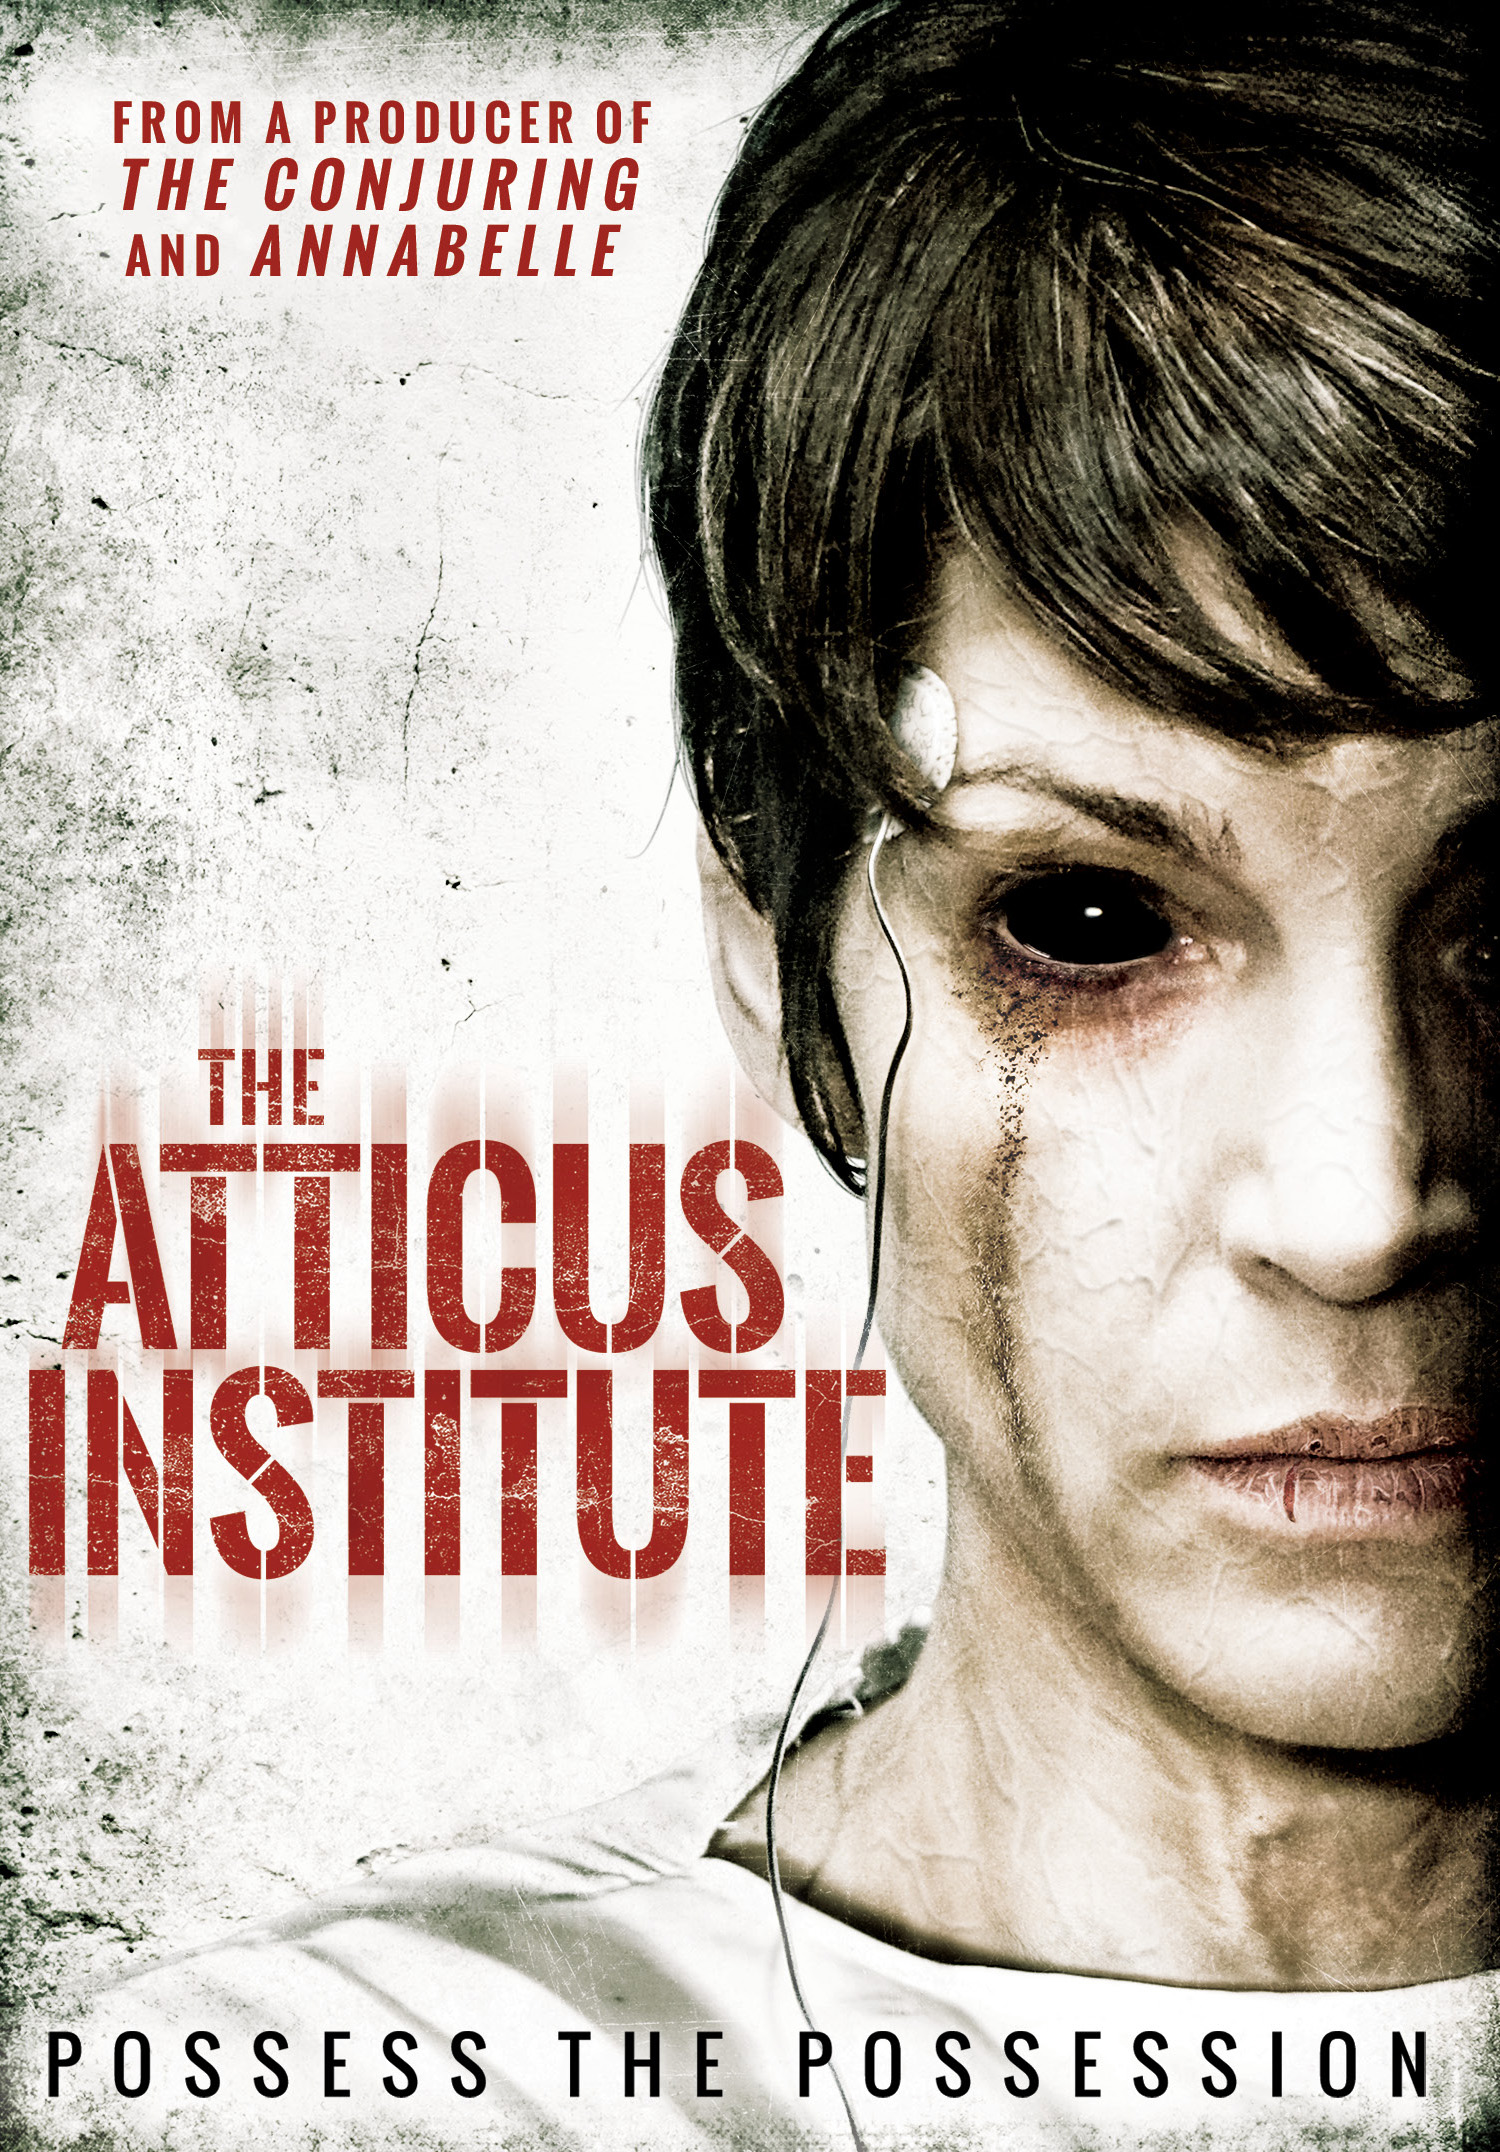 The Atticus Institute – YouTube (Free) Mockumentary w/ Found Footage elements Horror